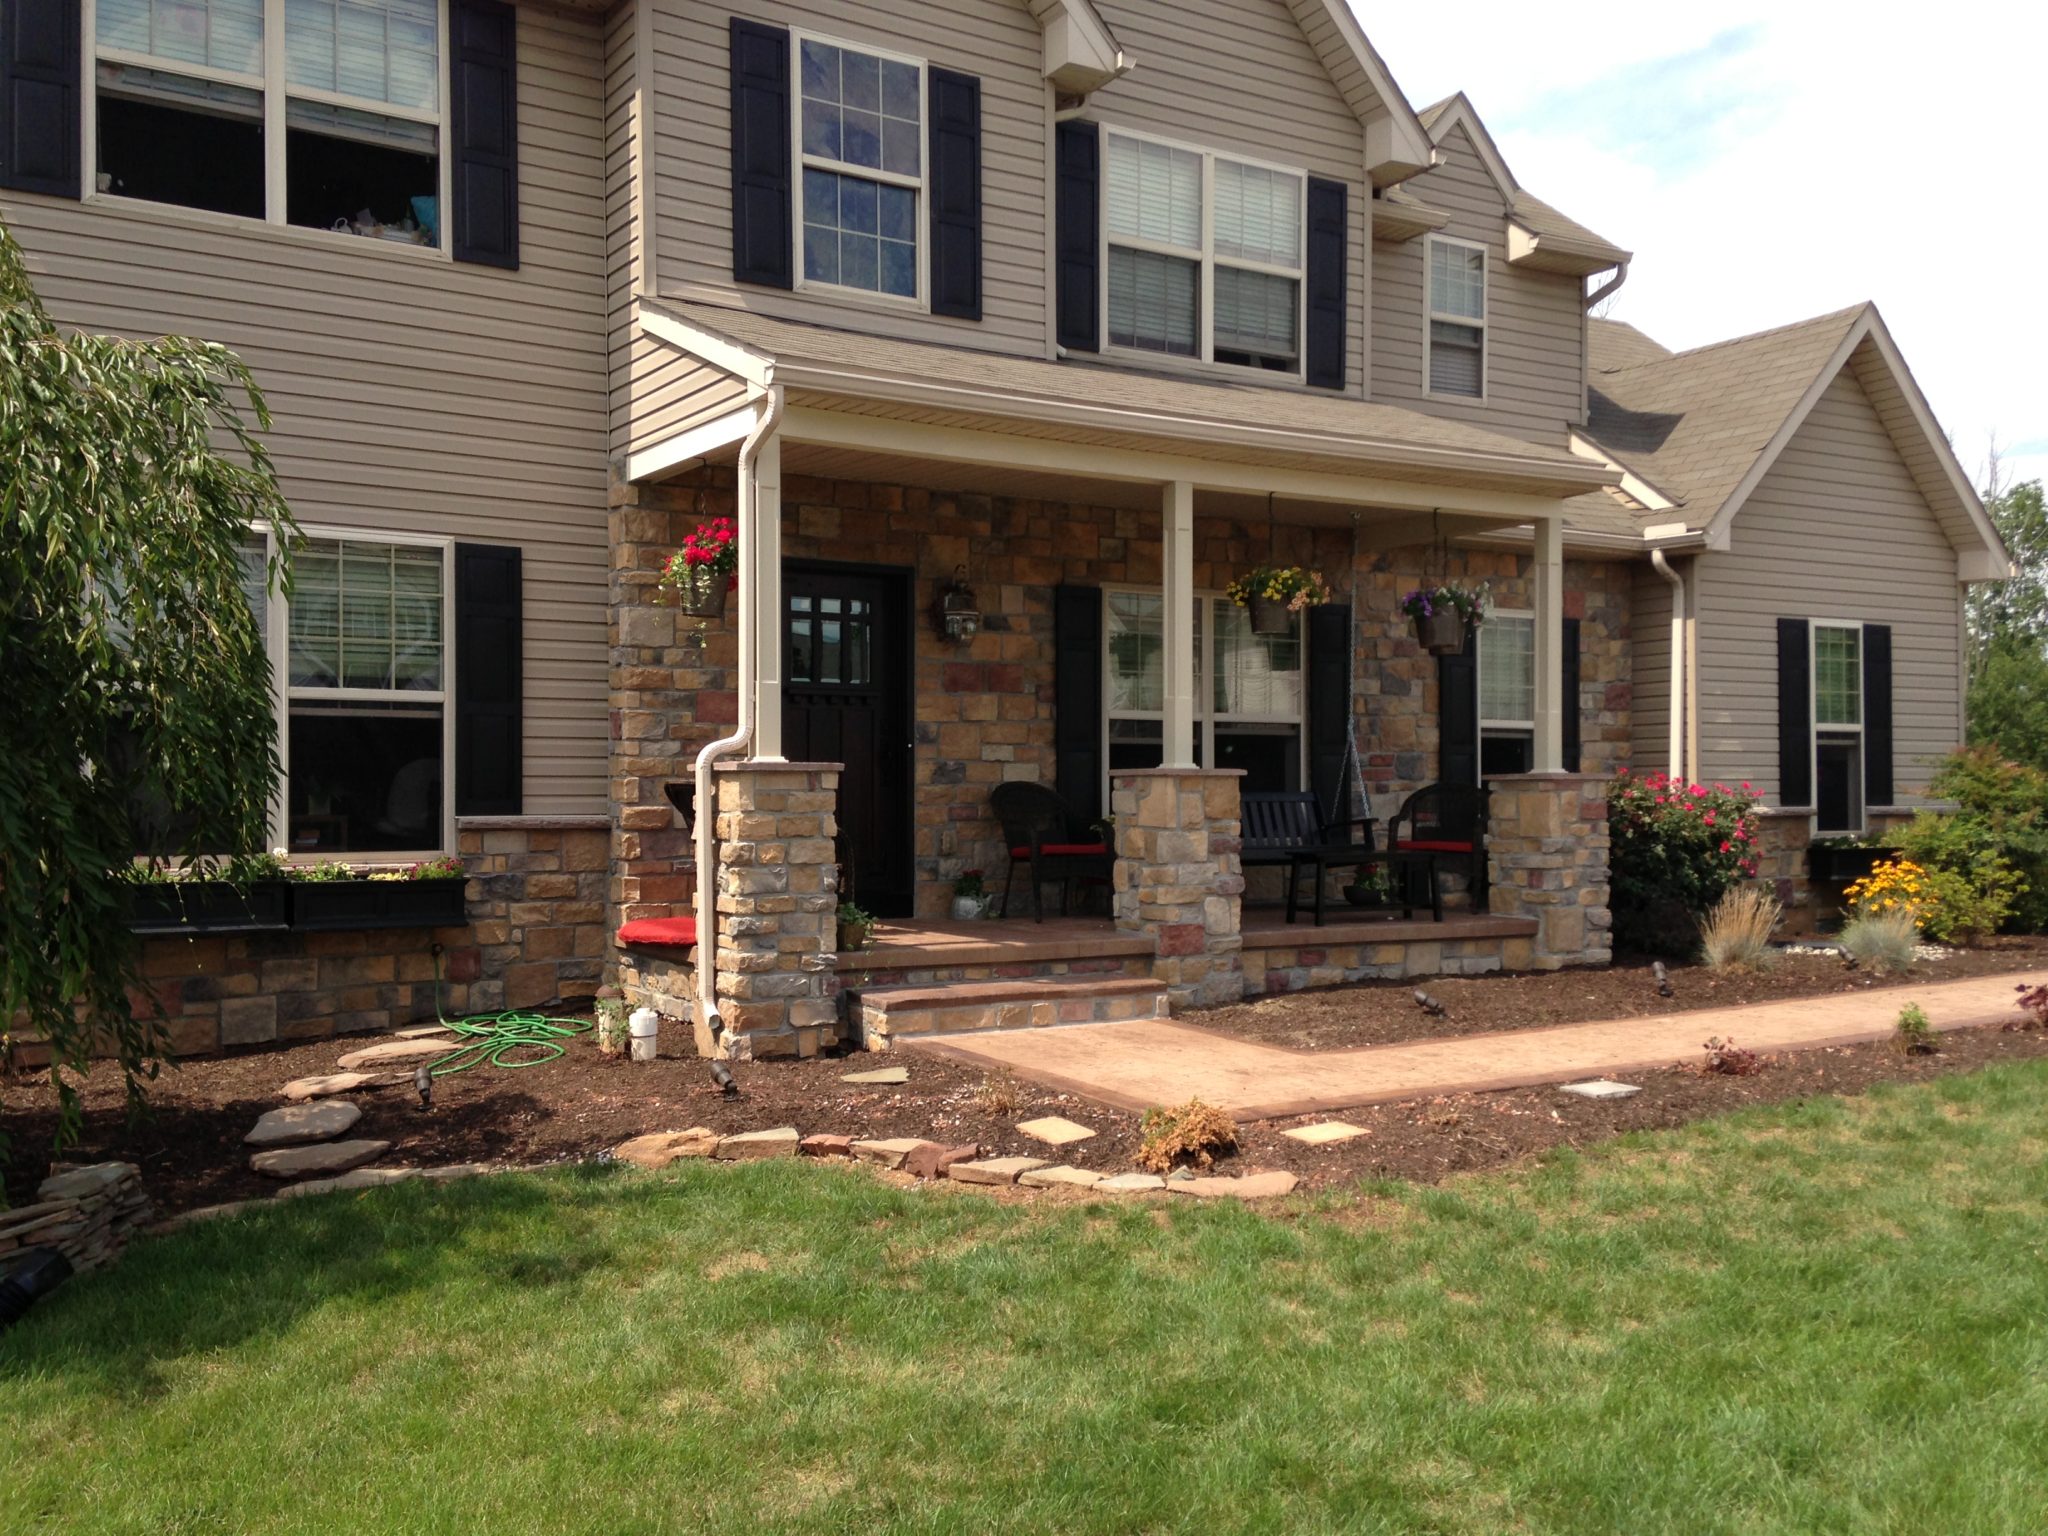 Reed Exterior Remodel in York, PA, Pennsylvania Hardscape Outdoor Remodel